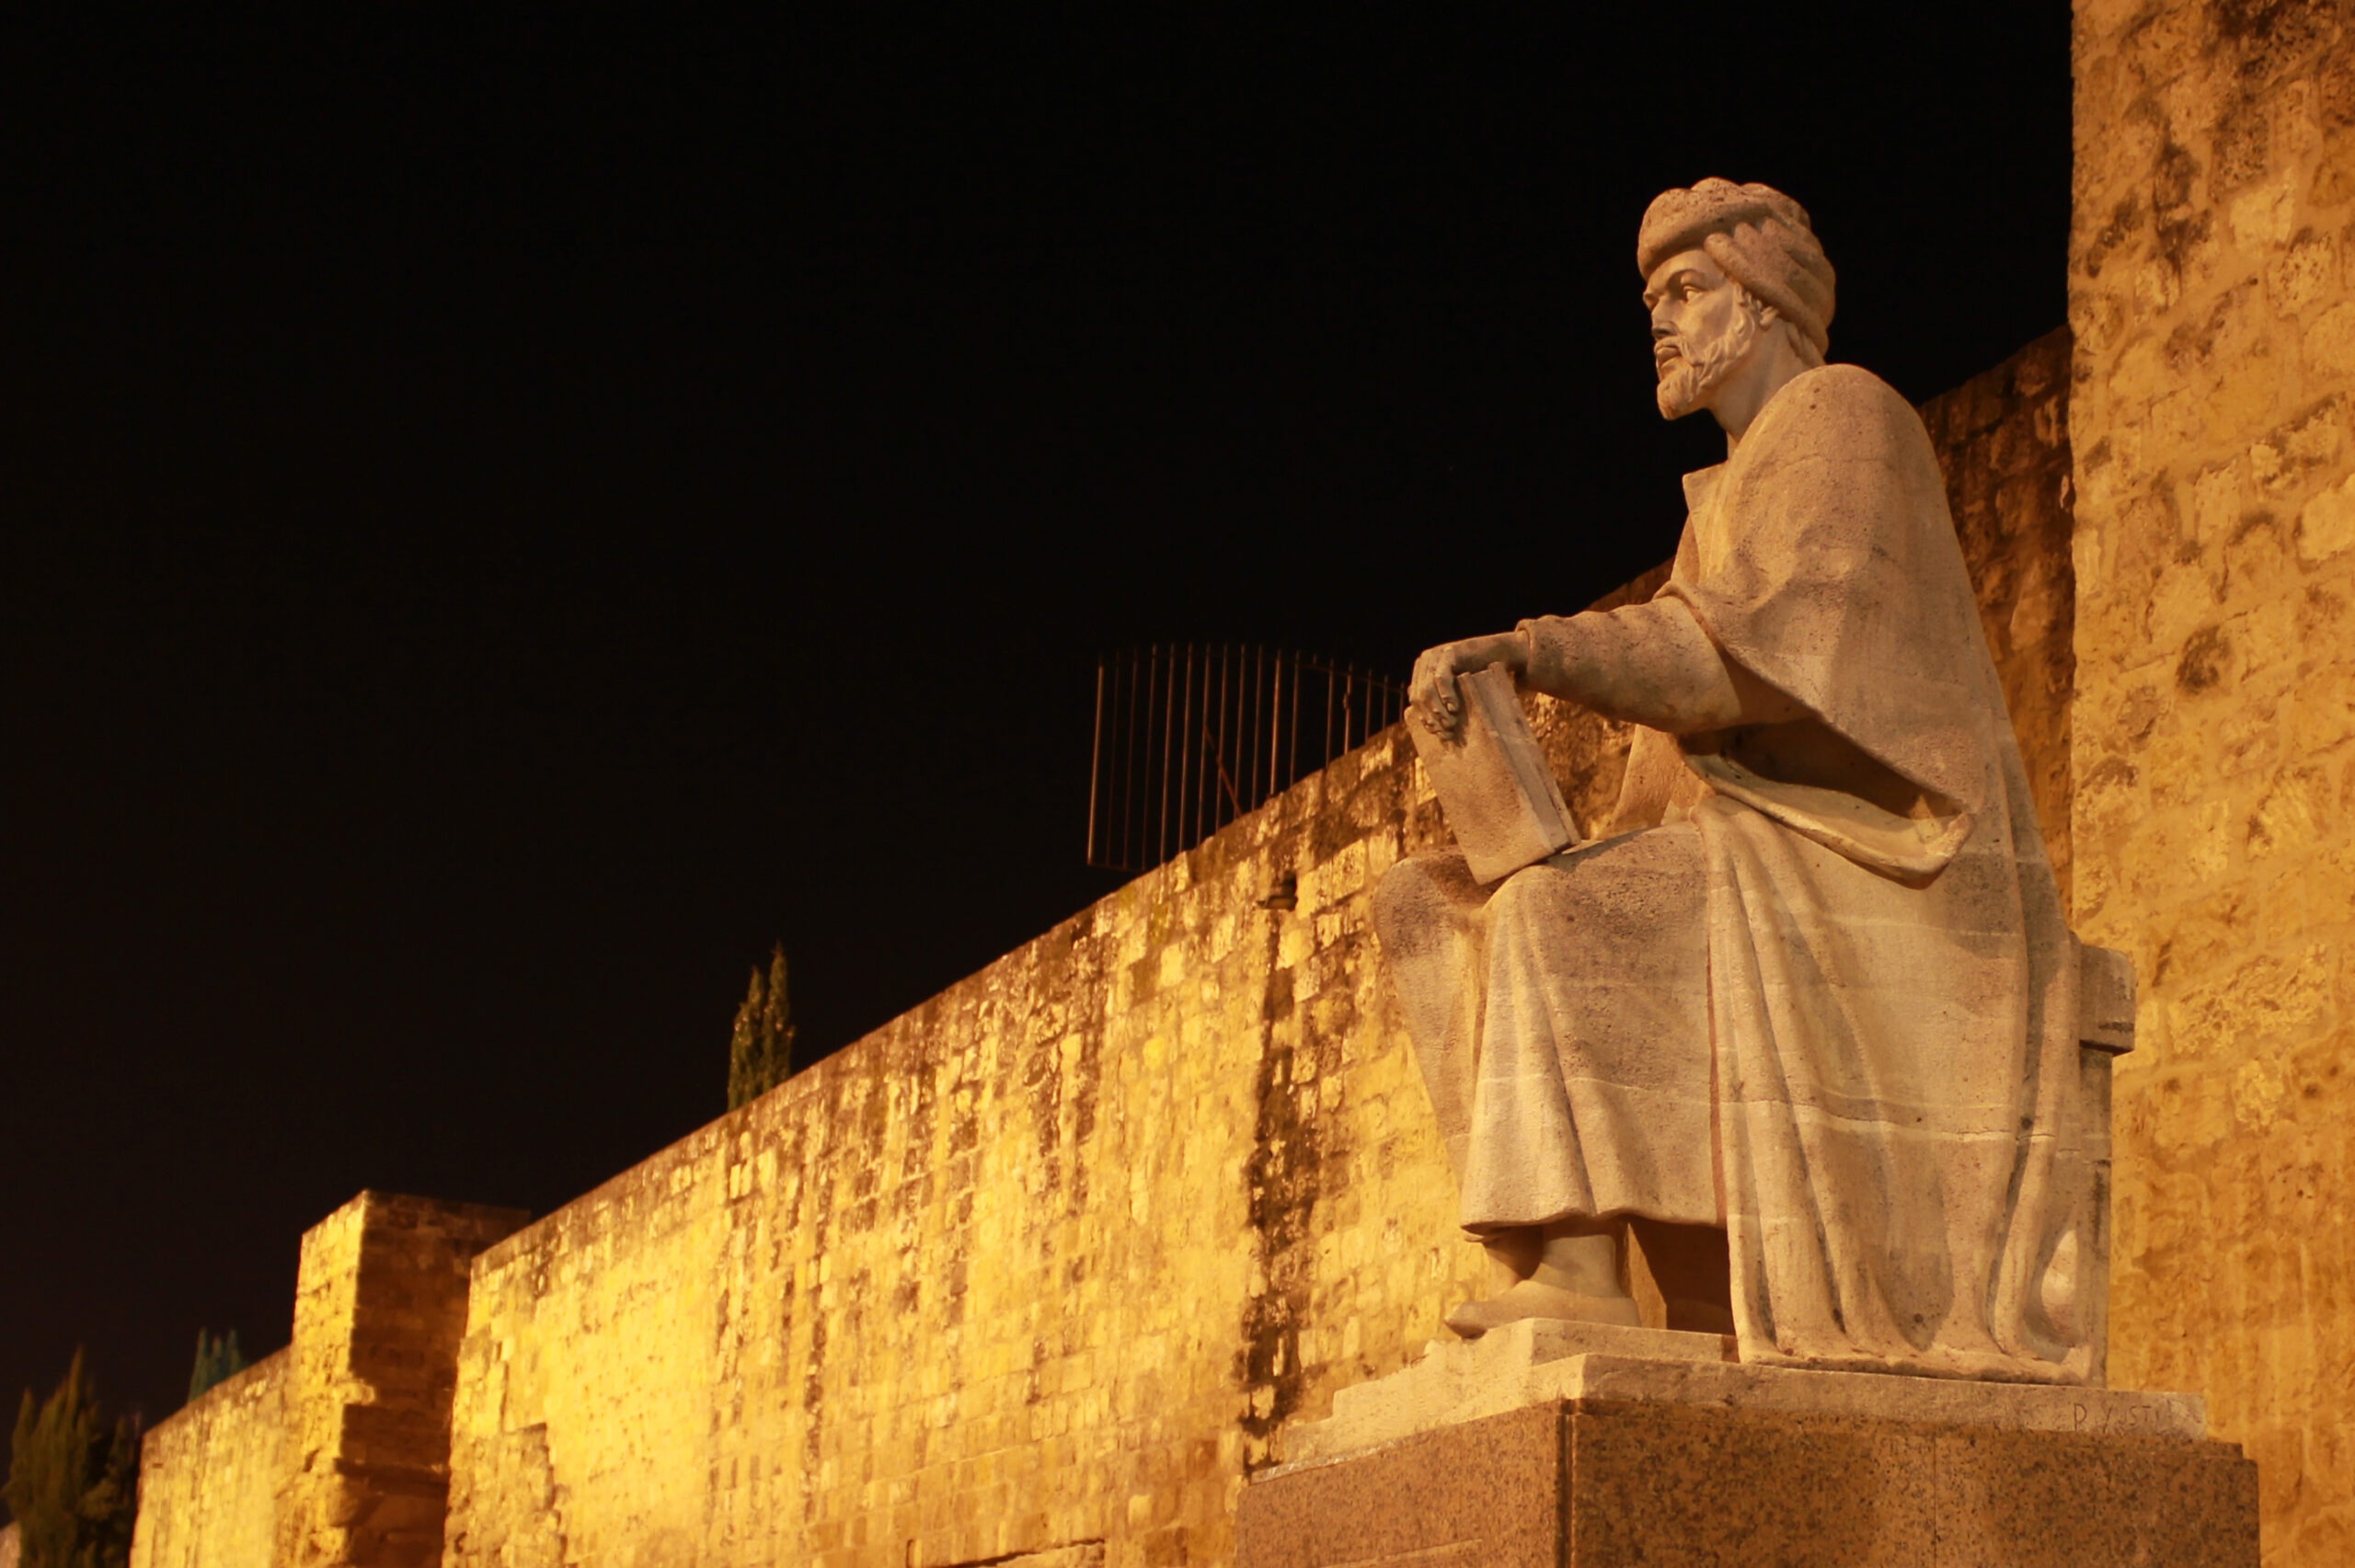 Does the Renaissance have roots in Islamic philosophy?